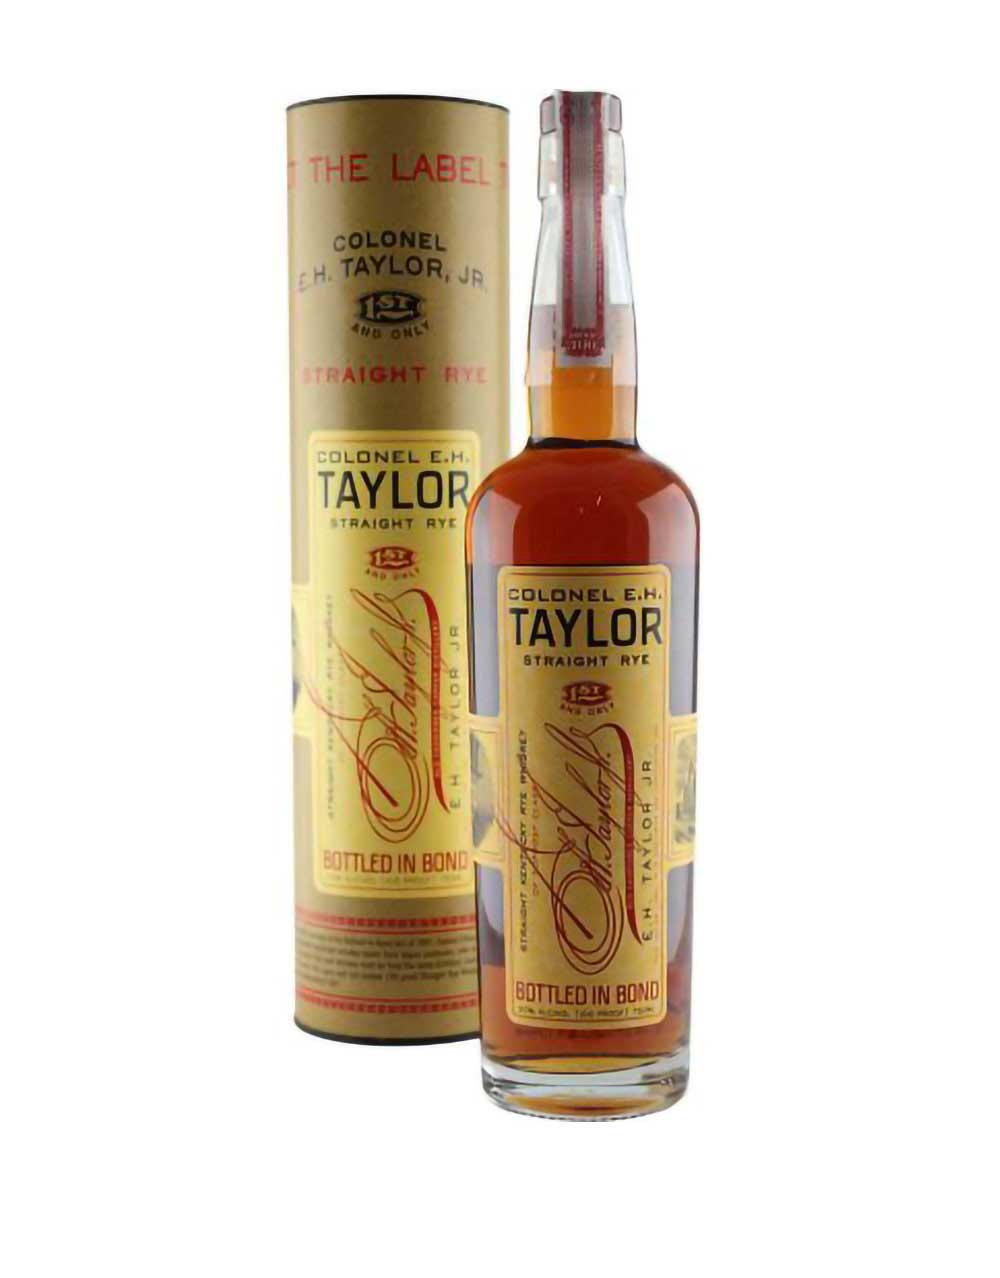 Colonel E.H. Taylor Straight Rye Whiskey